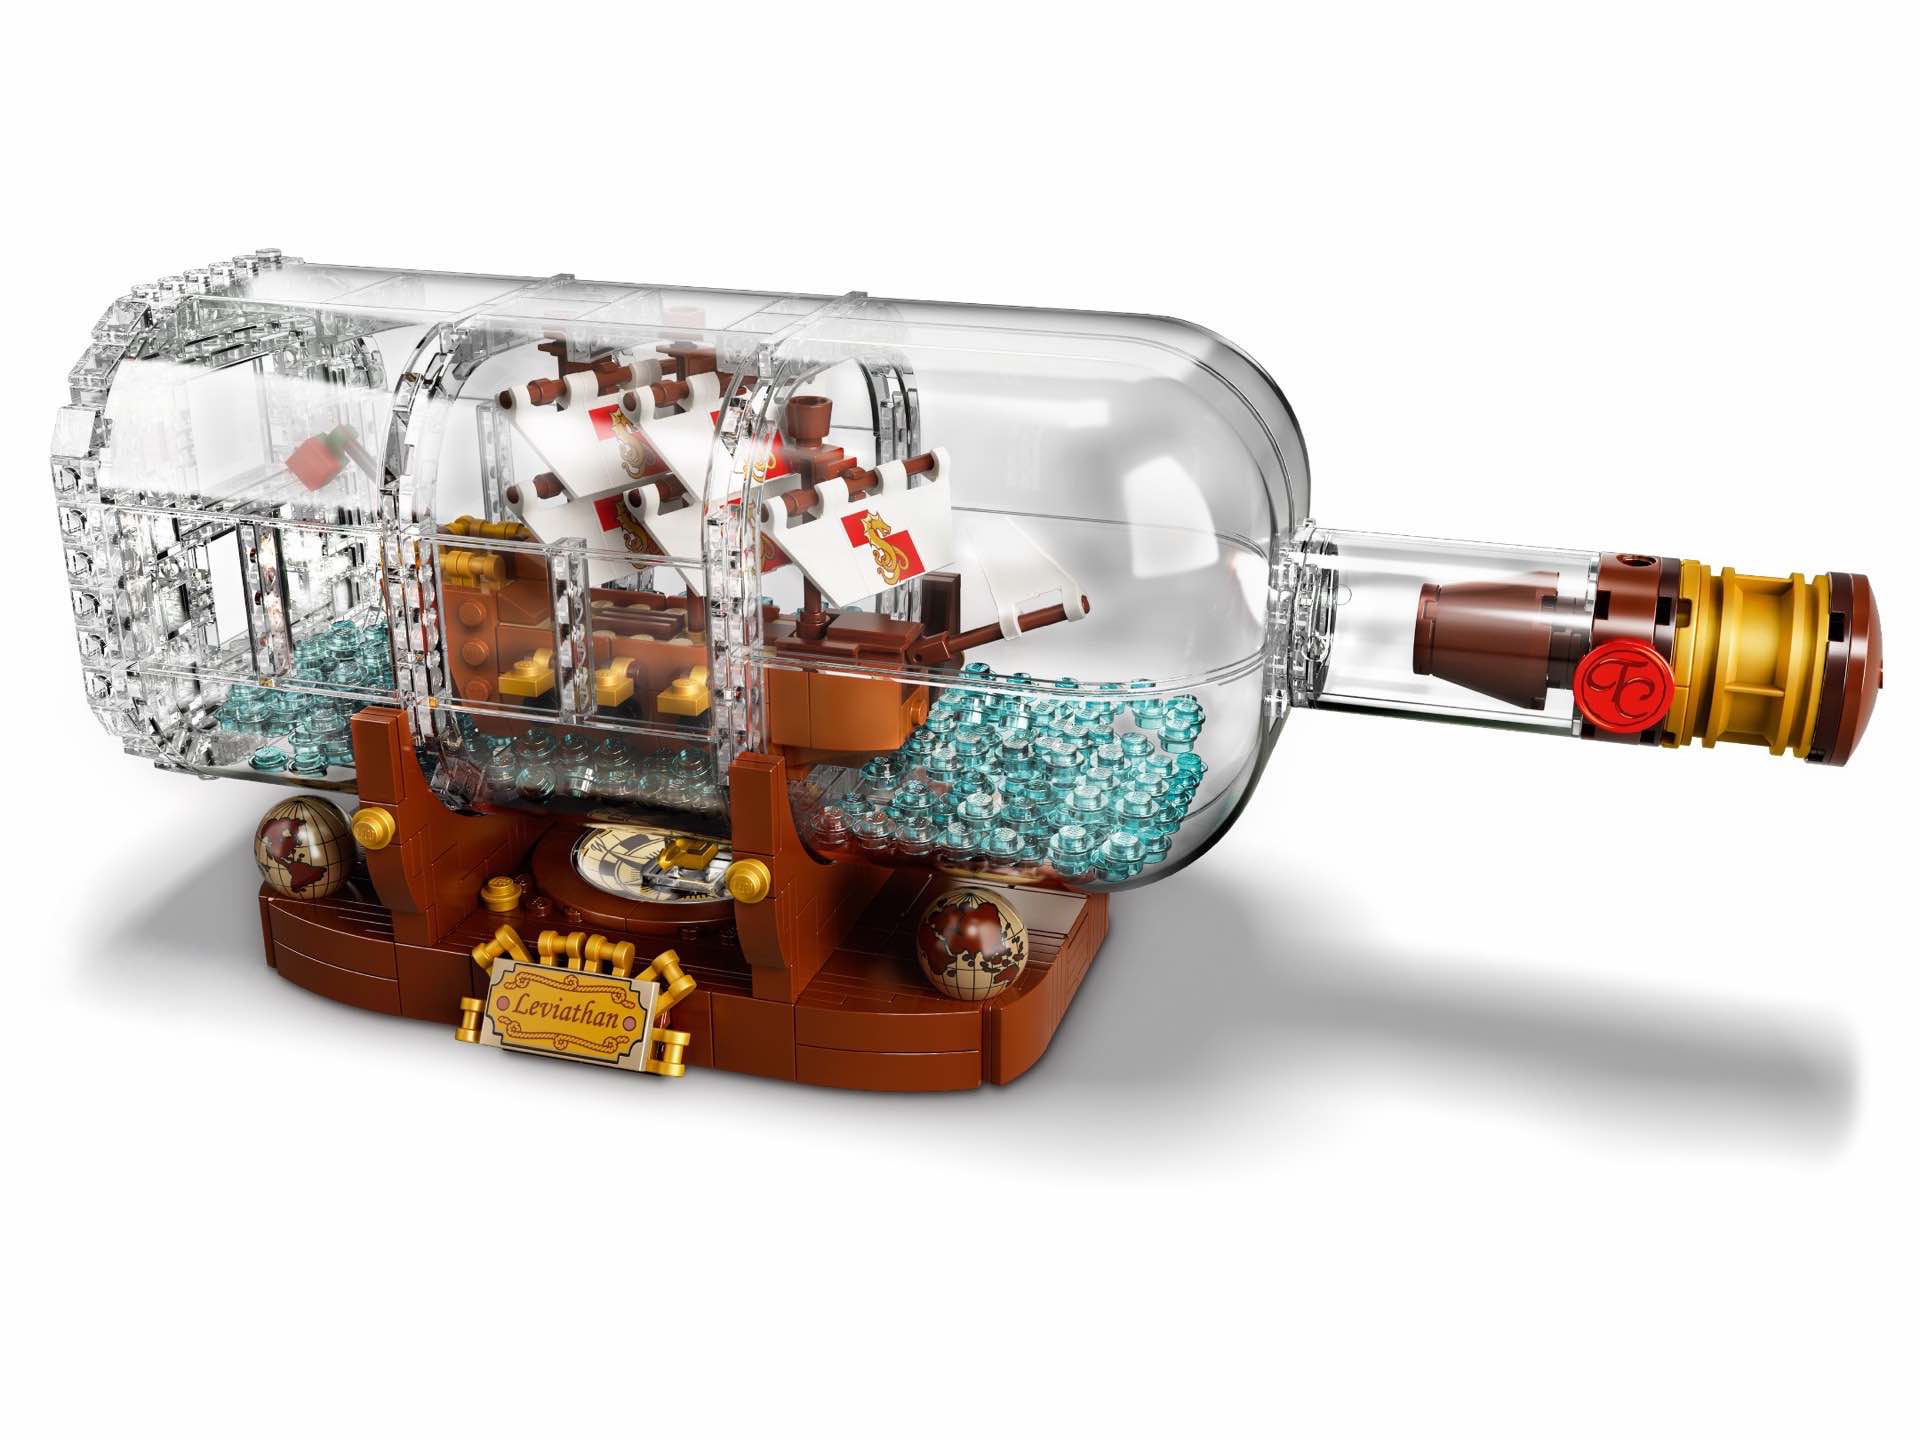 LEGO Ideas “Ship in a Bottle” Model Kit — Tools and Toys